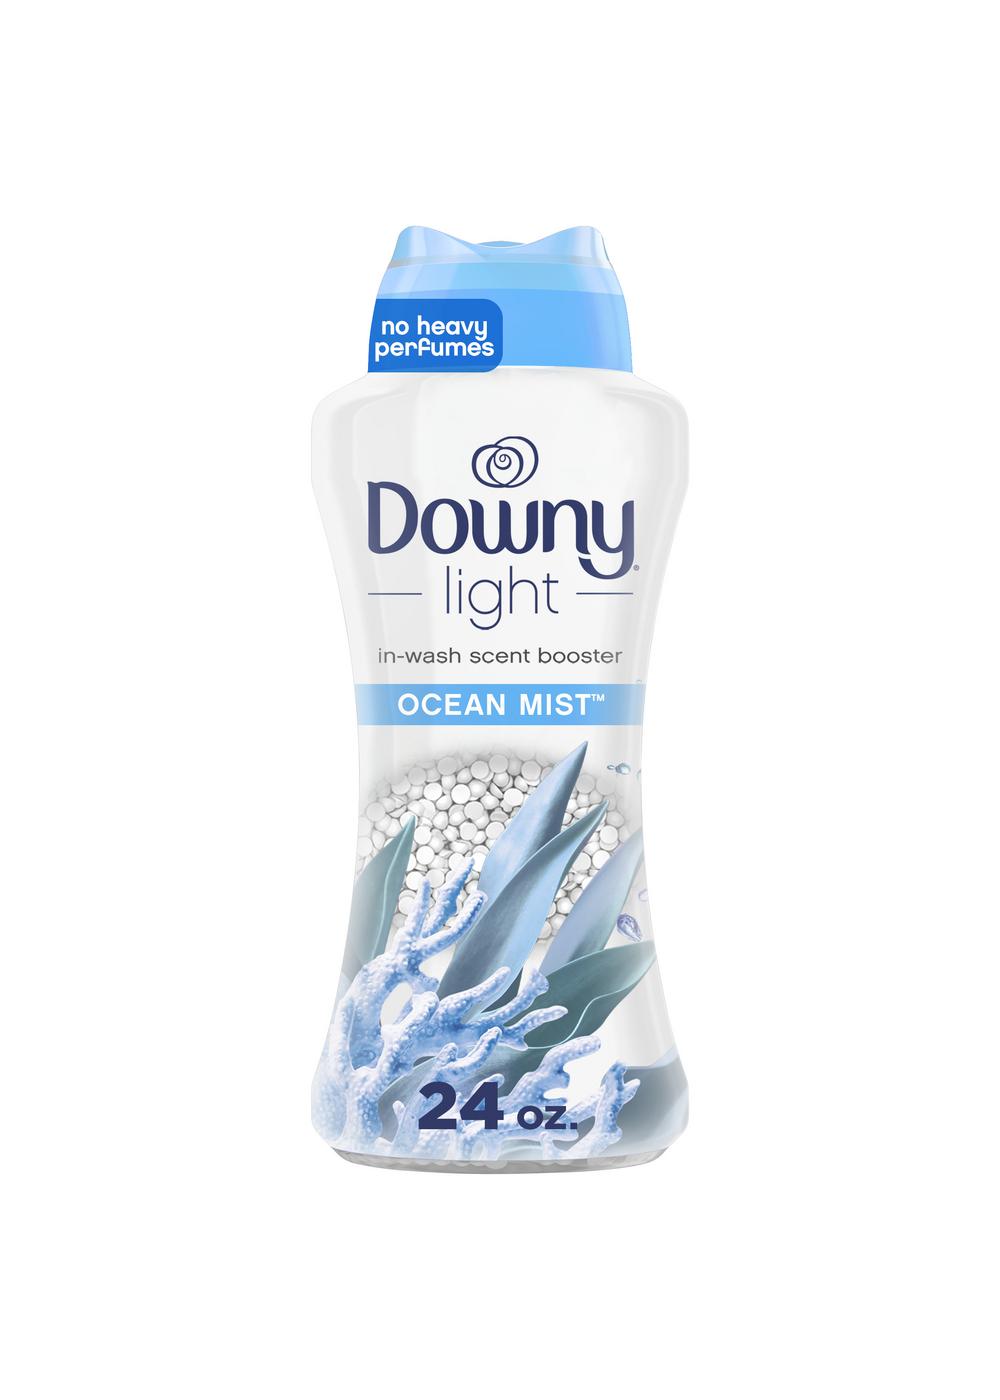 Downy Light In-Wash Scent Booster - Ocean Mist; image 1 of 11